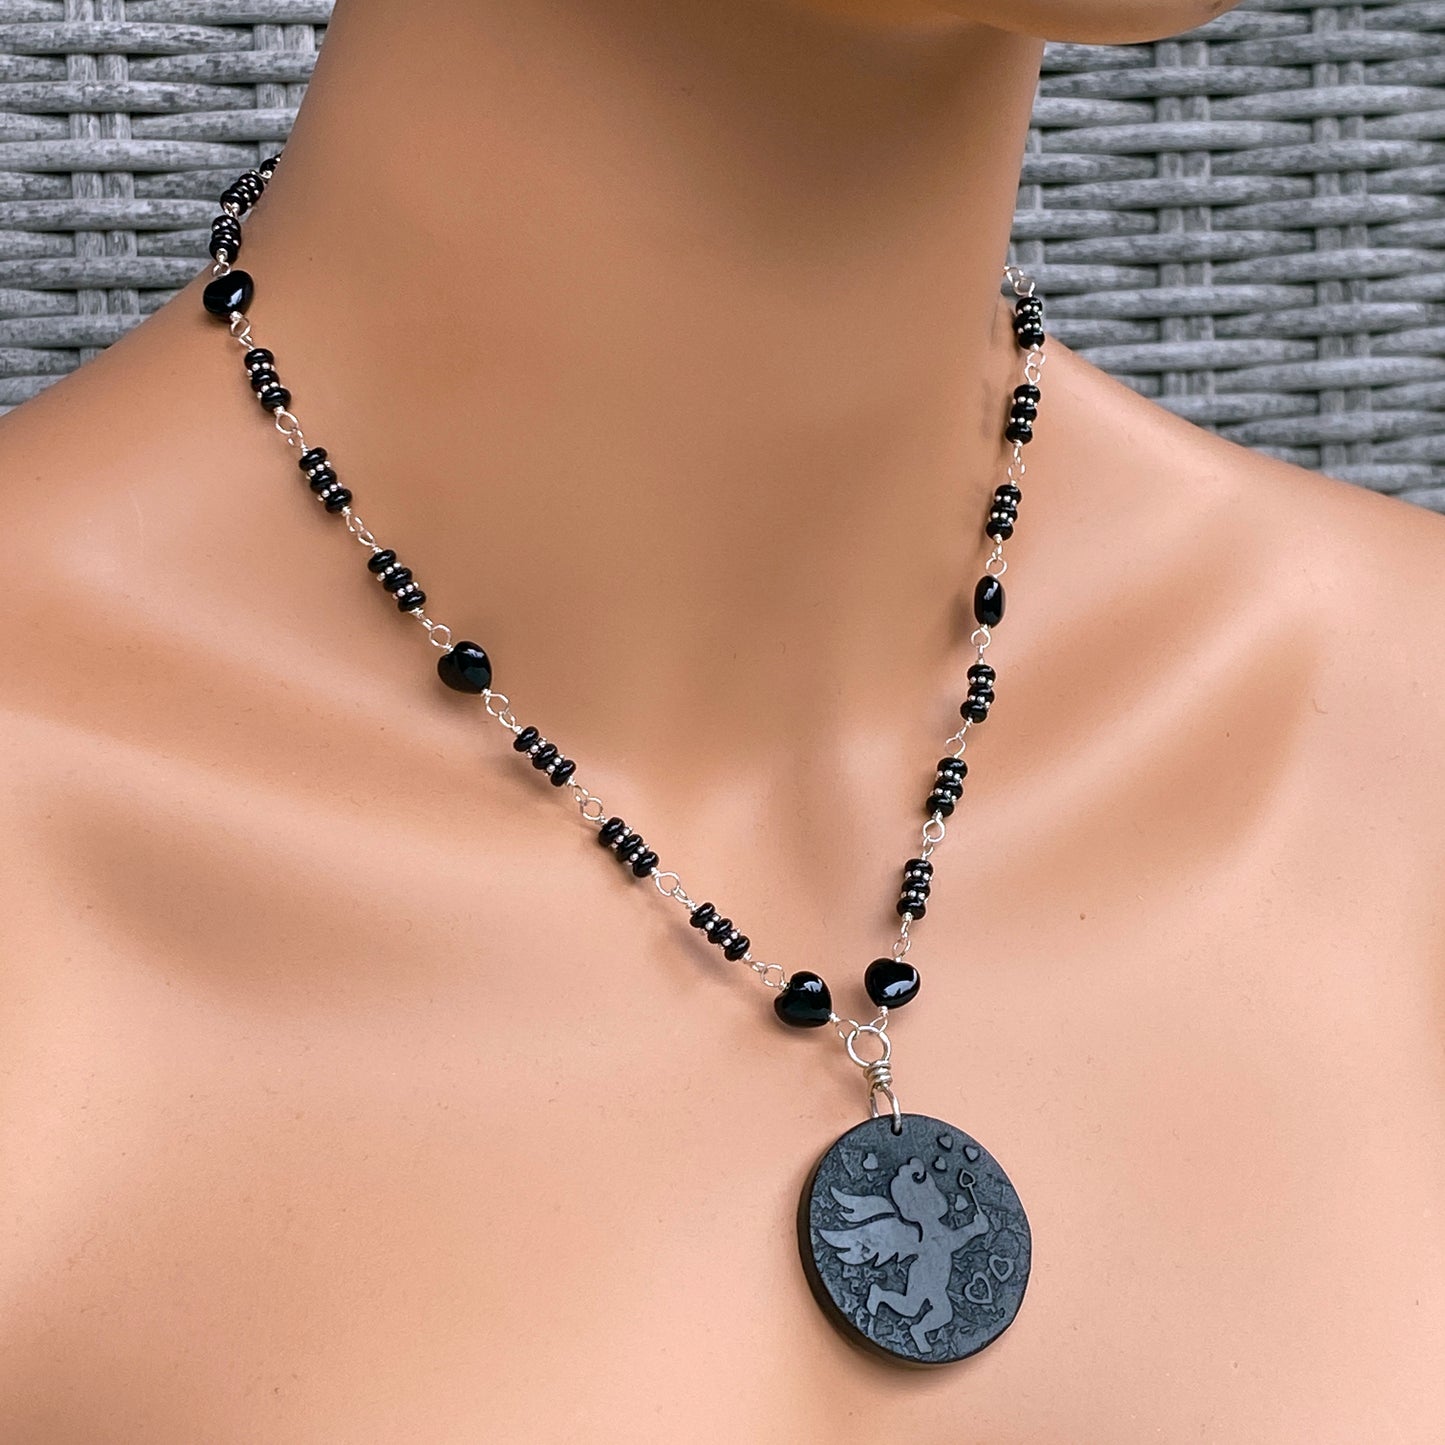 Carved Shungite Cupid Angel on Sterling Silver Chain with Onyx Gemstones